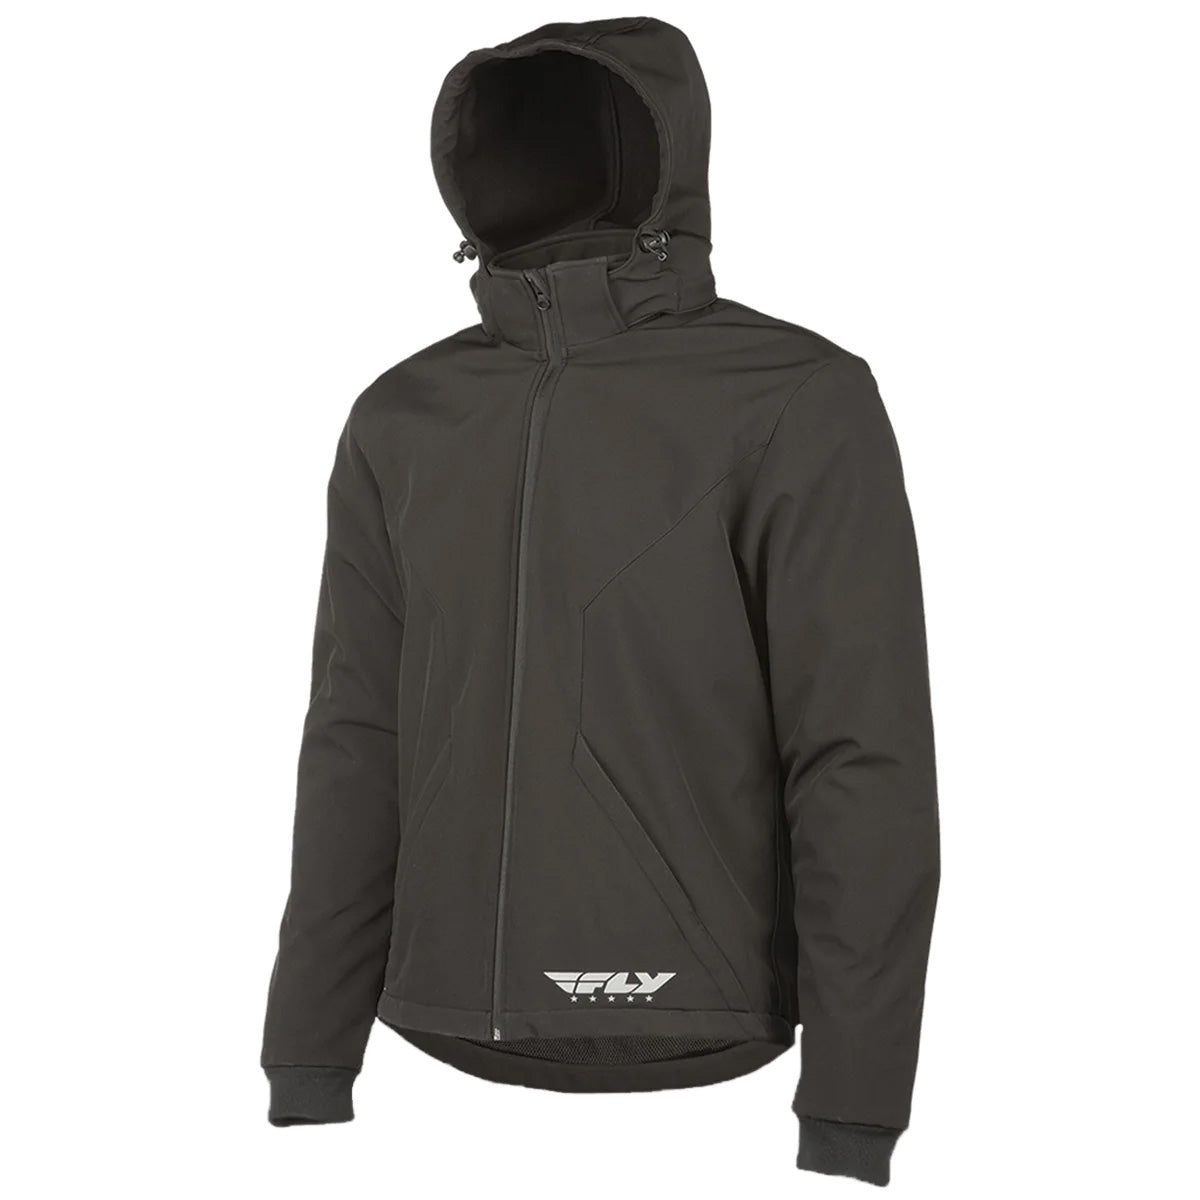 Fly Racing Armored Tech Hoodie Men's Street Jackets 